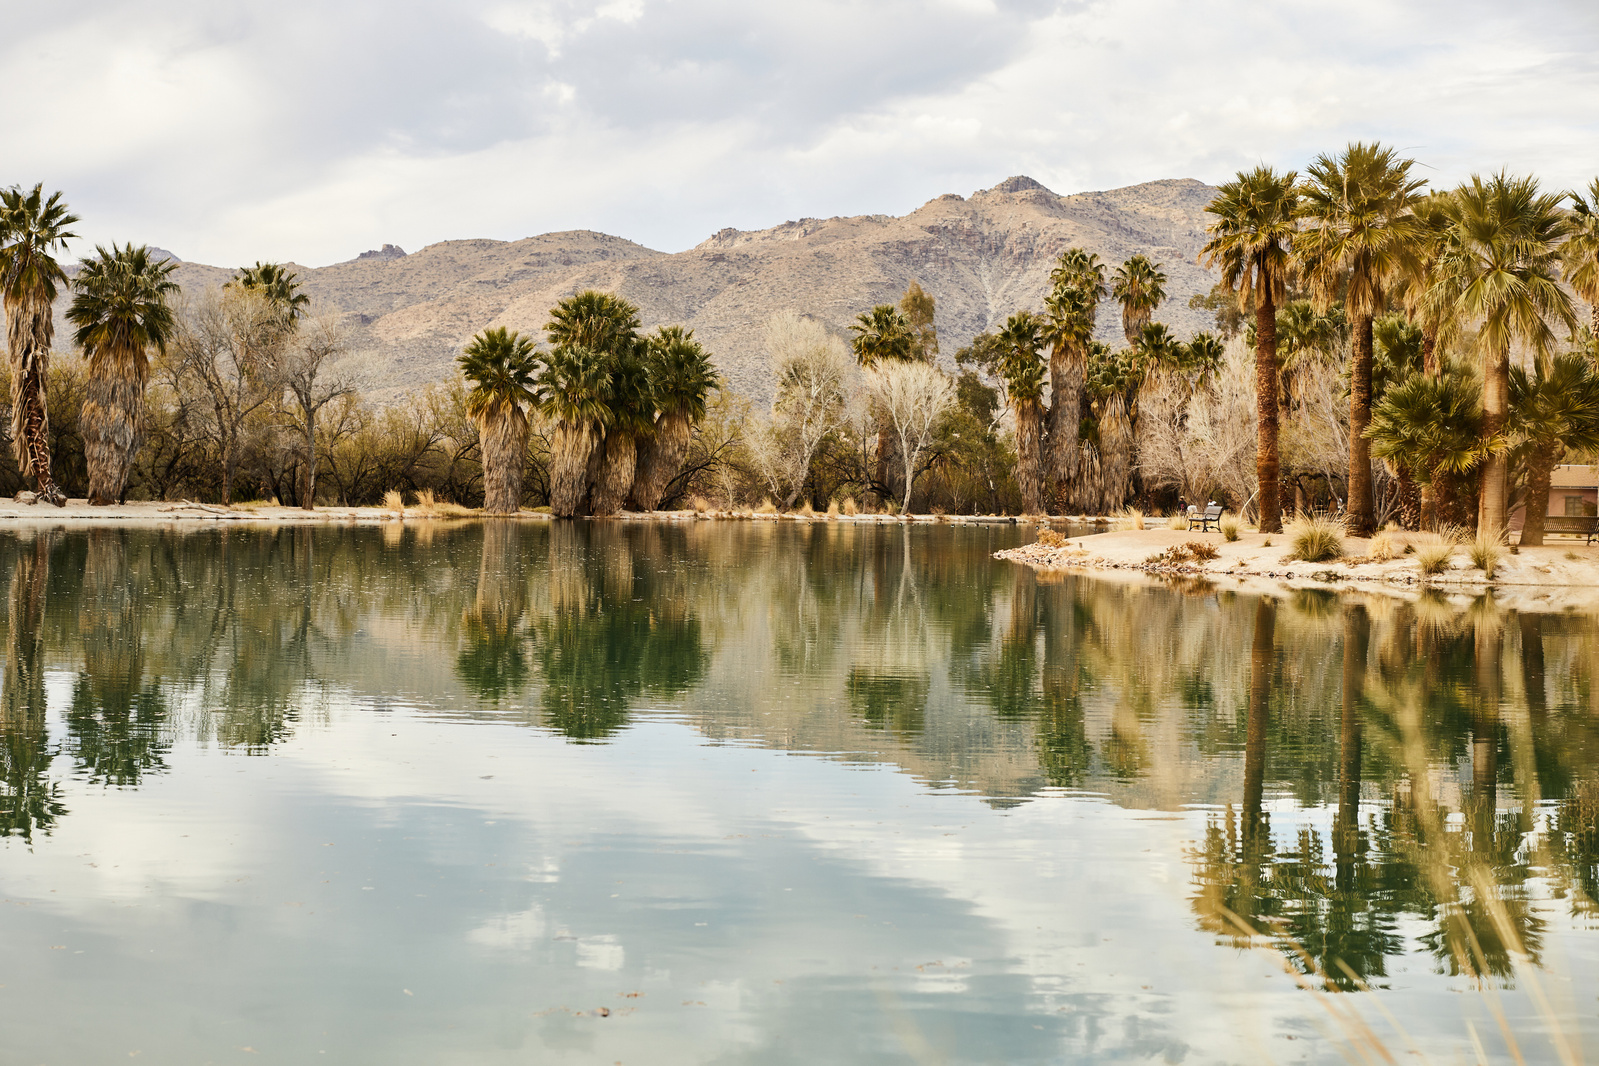 Summer Arizona landscape with palm trees and mountains reflecting in a lake. Lifestyle photography for The Buckle